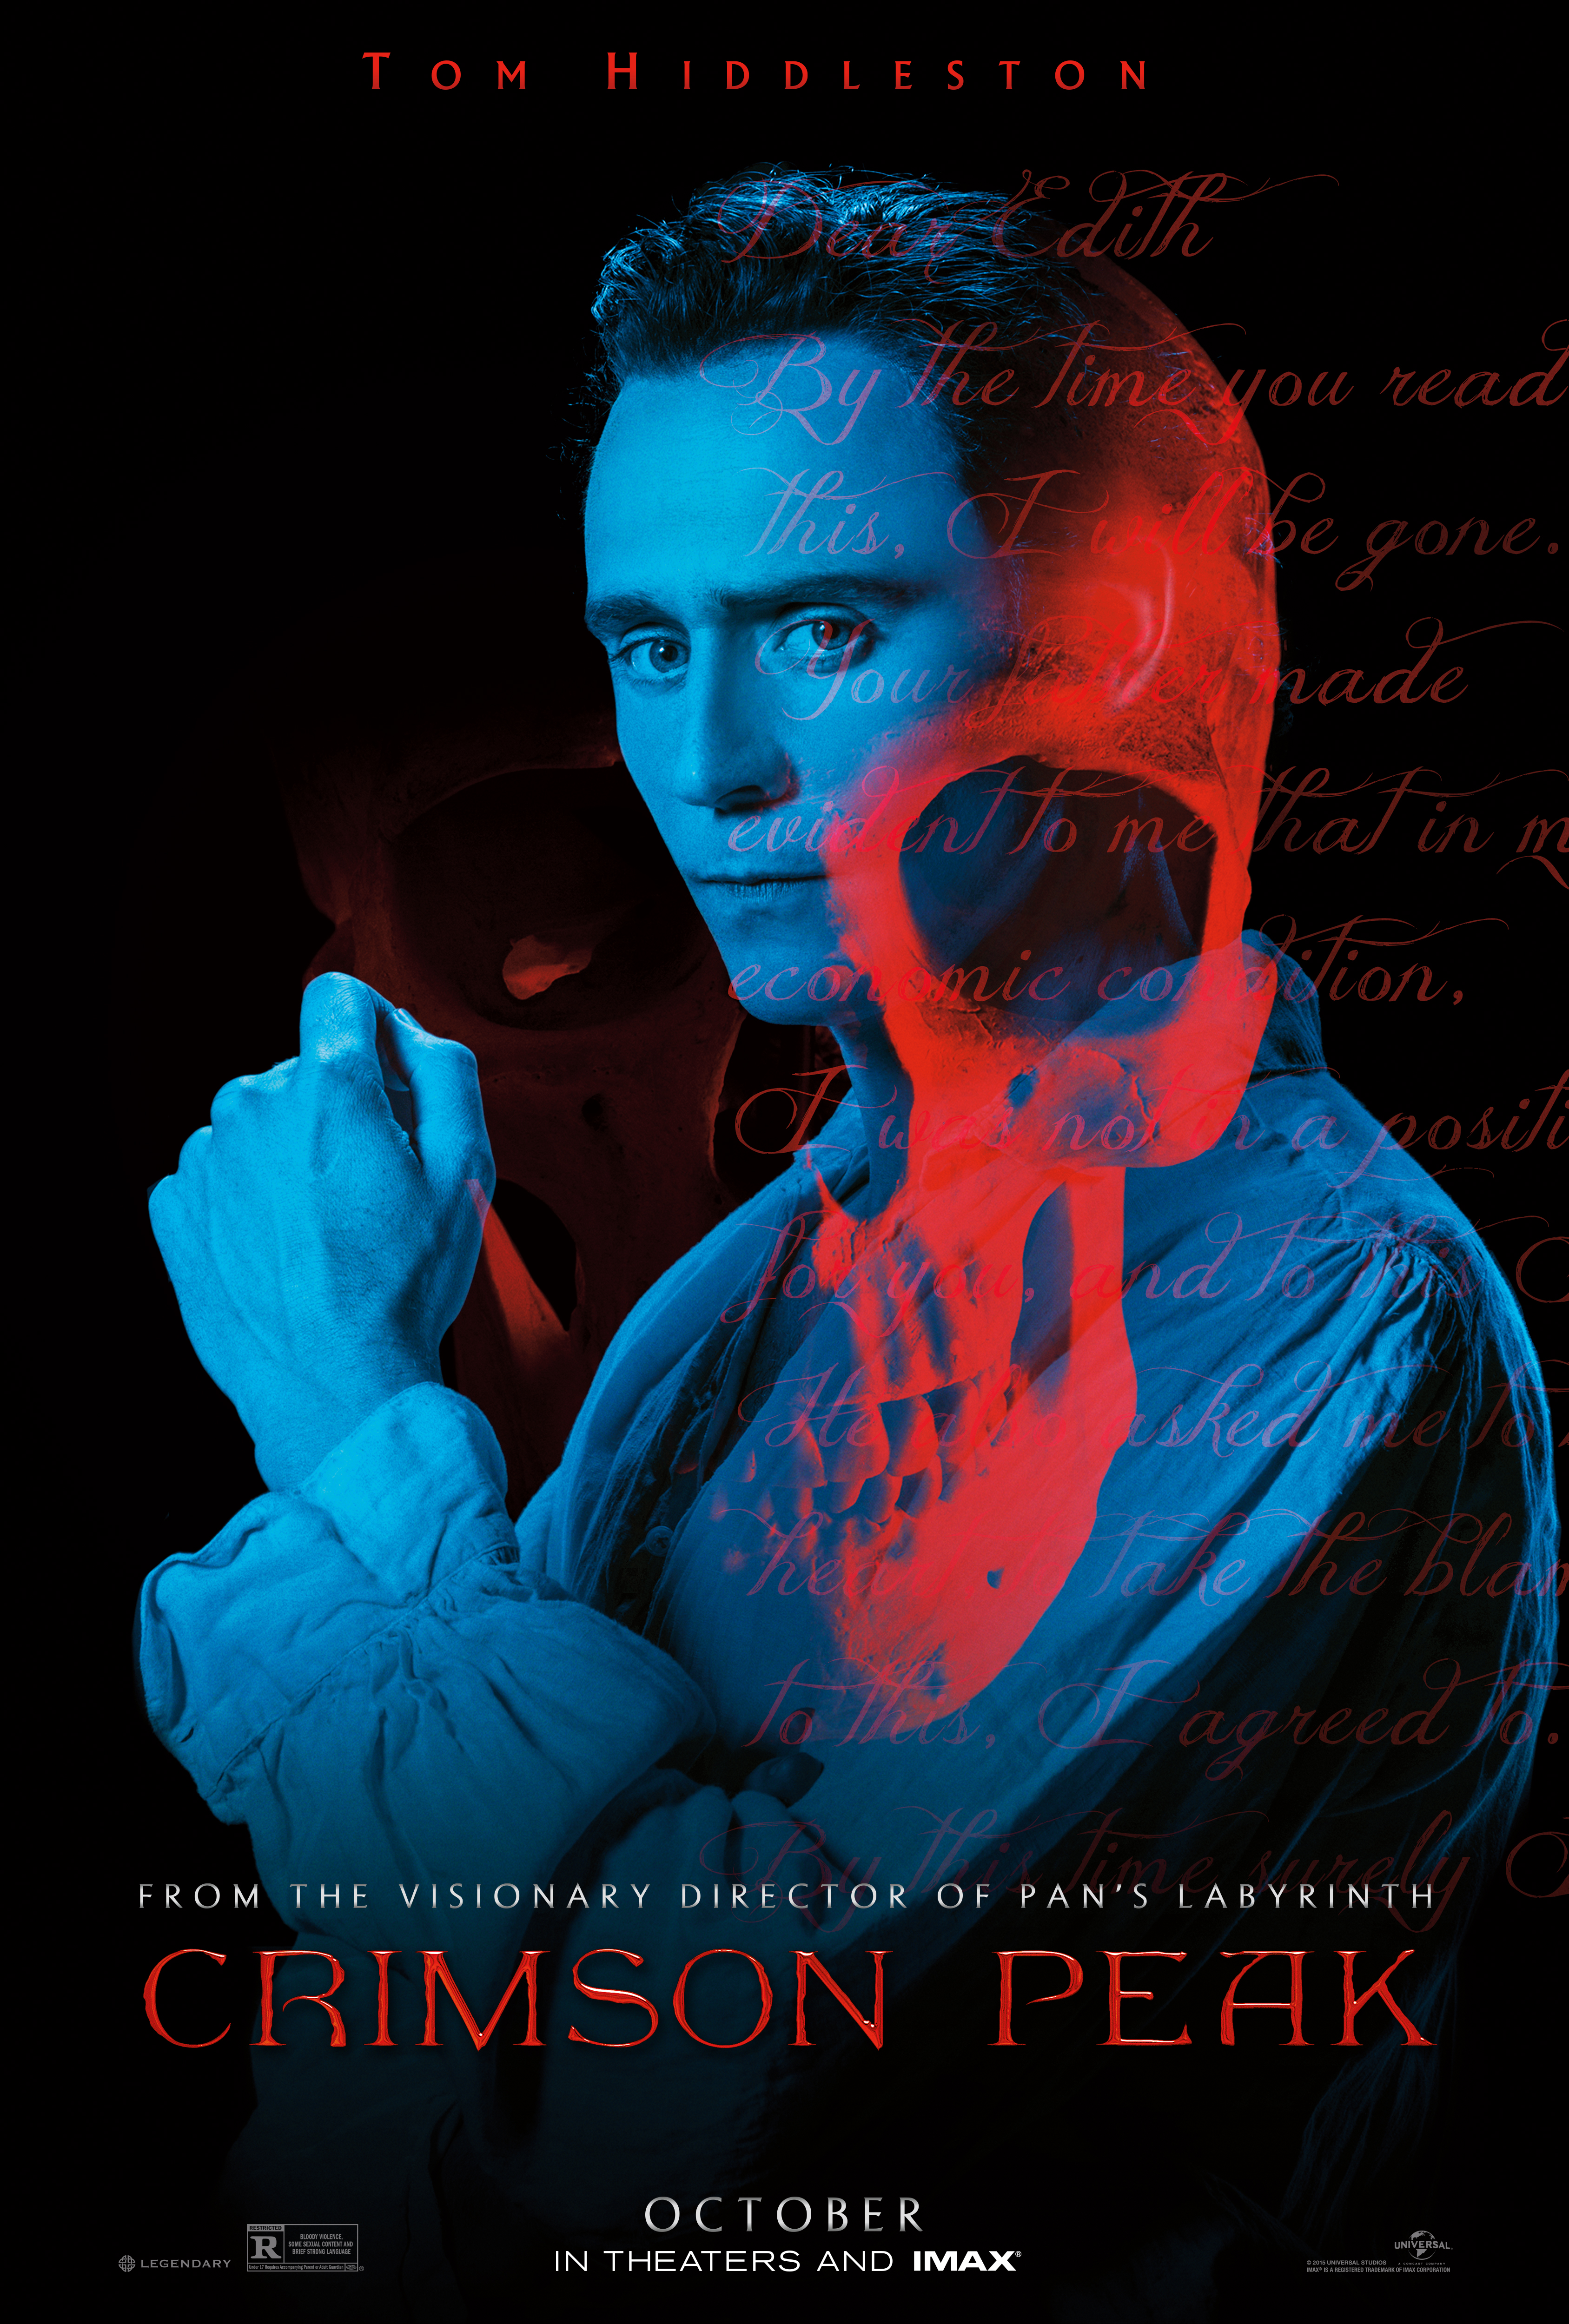 New Character Posters For Guillermo del Toro's 'Crimson Peak' - Bloody  Disgusting